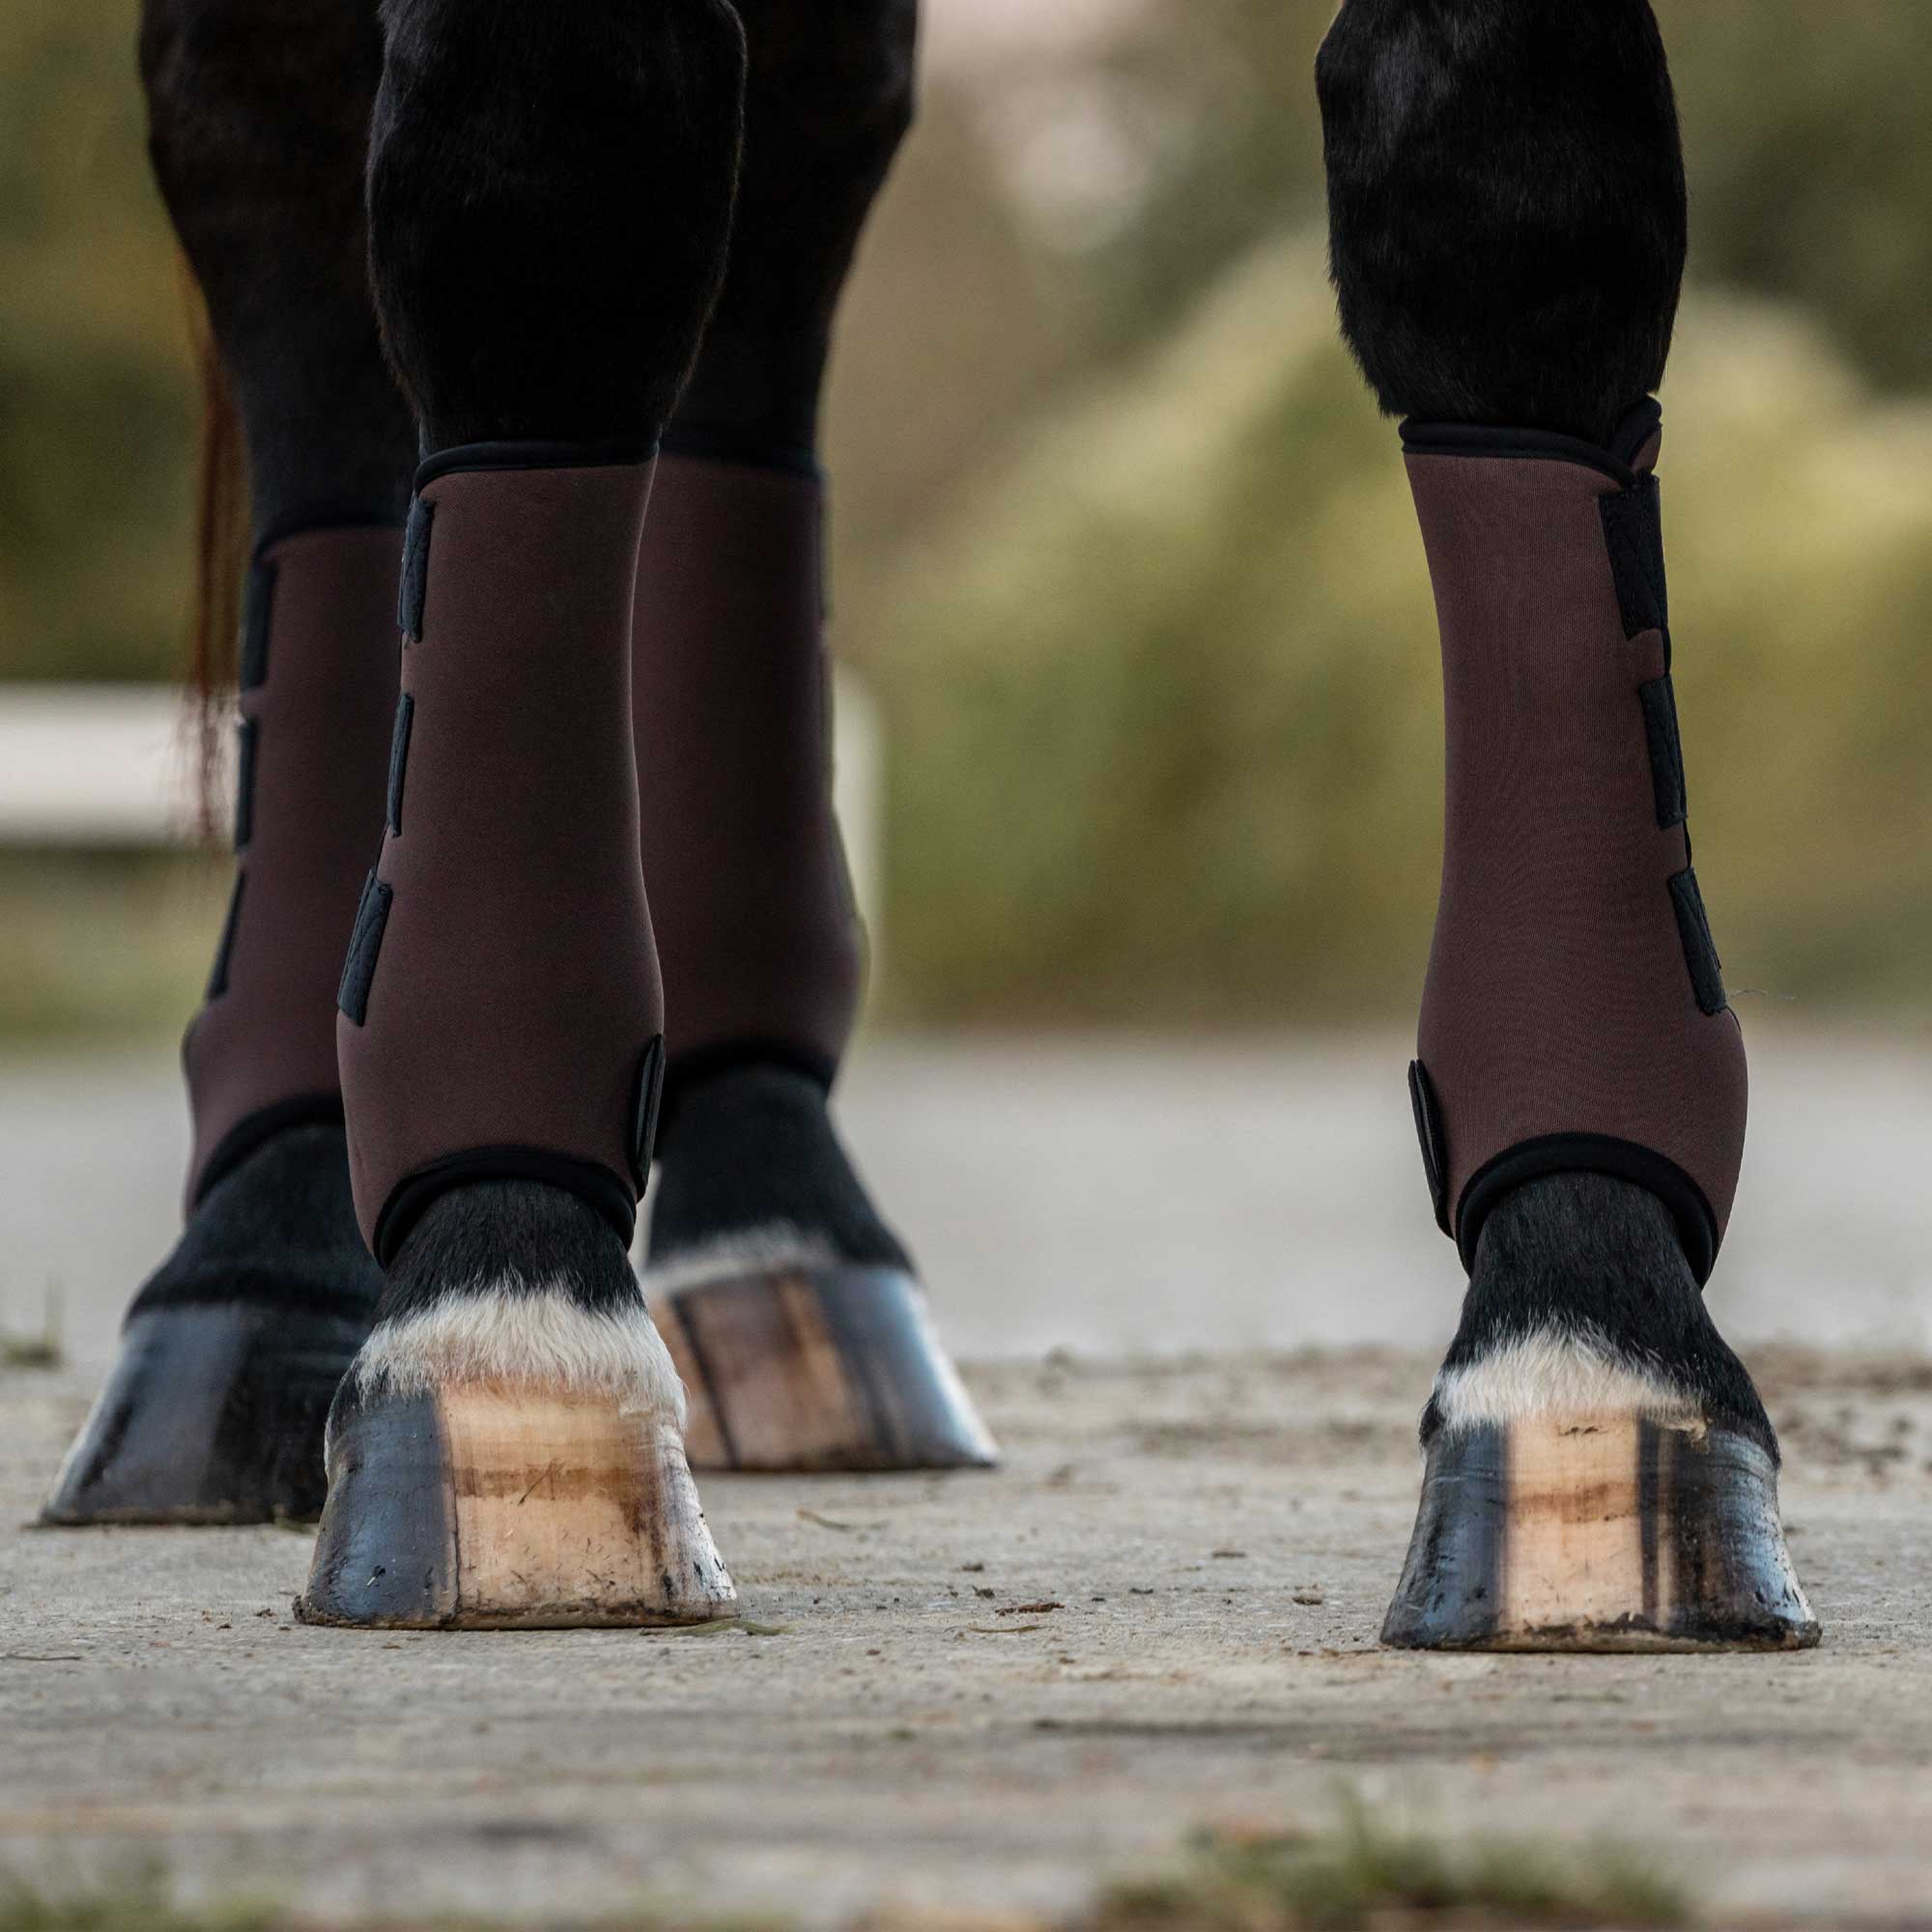 "Opal" Exercise Boots, Hind Legs